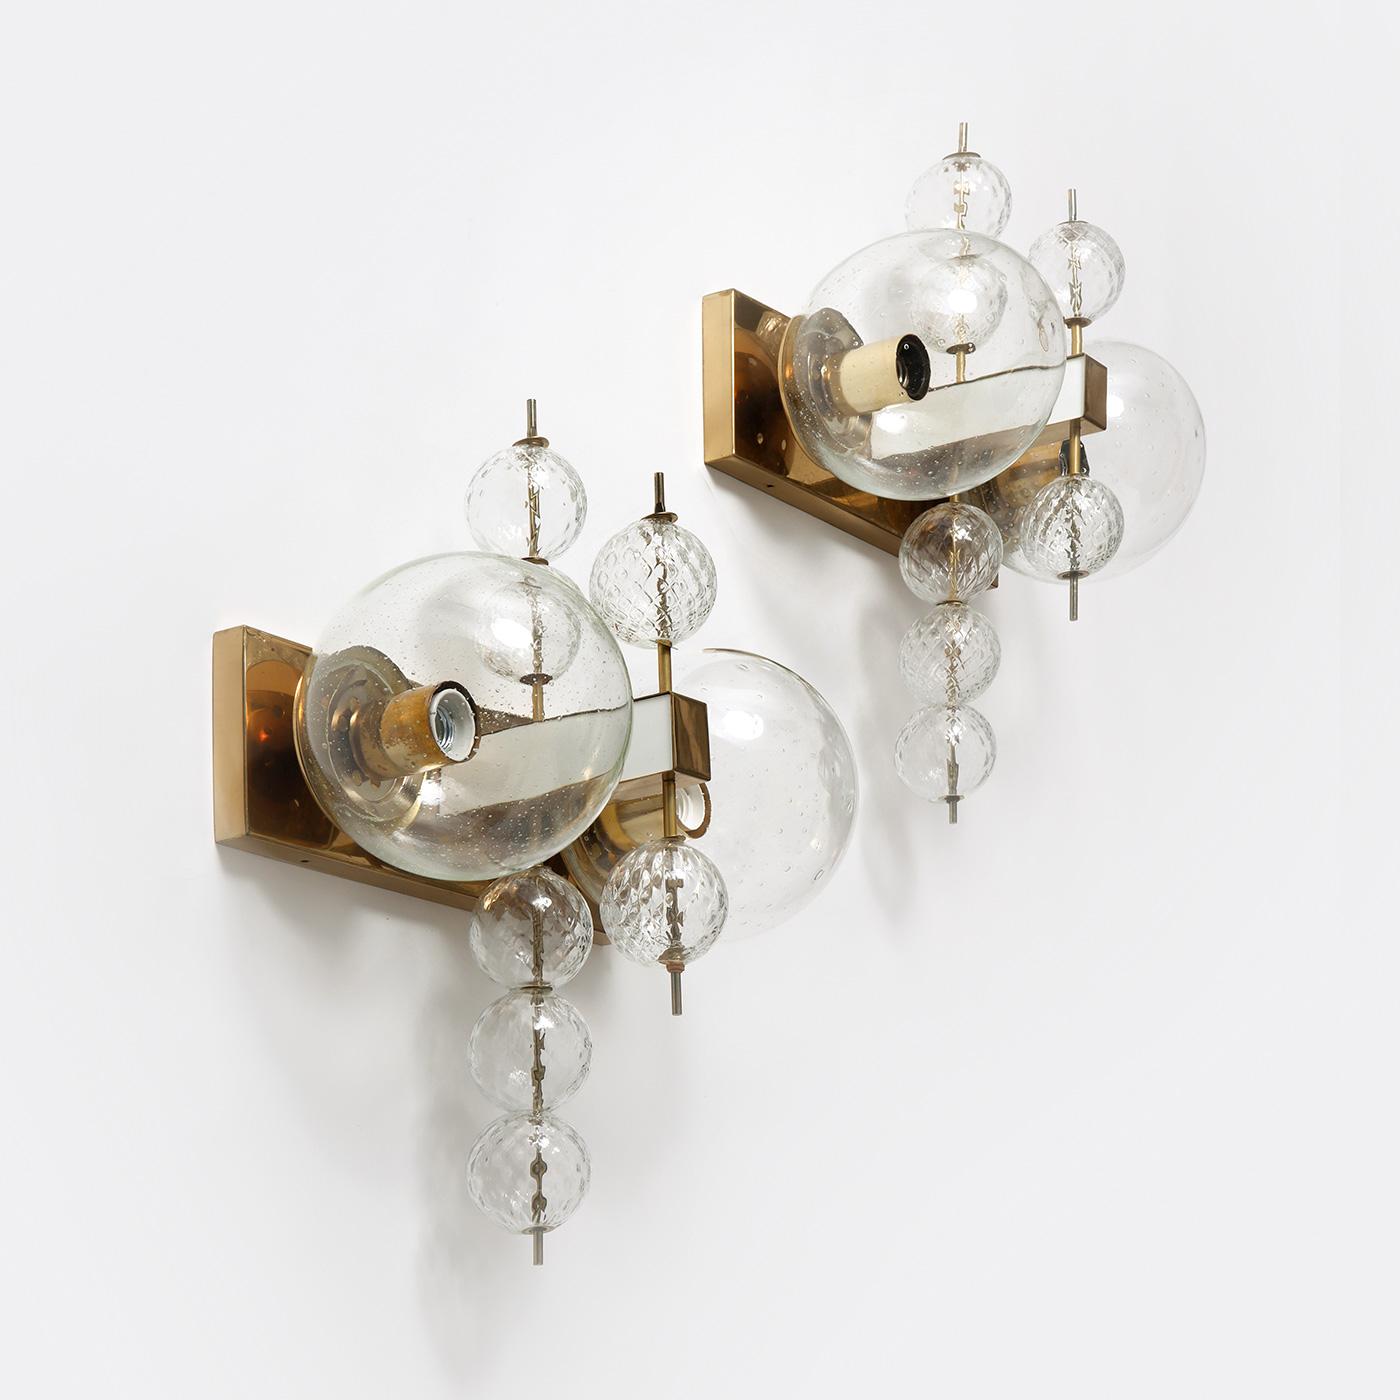 Rare pair of sculptural wall lamps in brass and glass, manufactured by Kamenický Šenov in former Czechoslovakia, 1970s.

These wall lamps have a magnificent sculptural design. Each lamp features a central brass fixture that holds two large glass